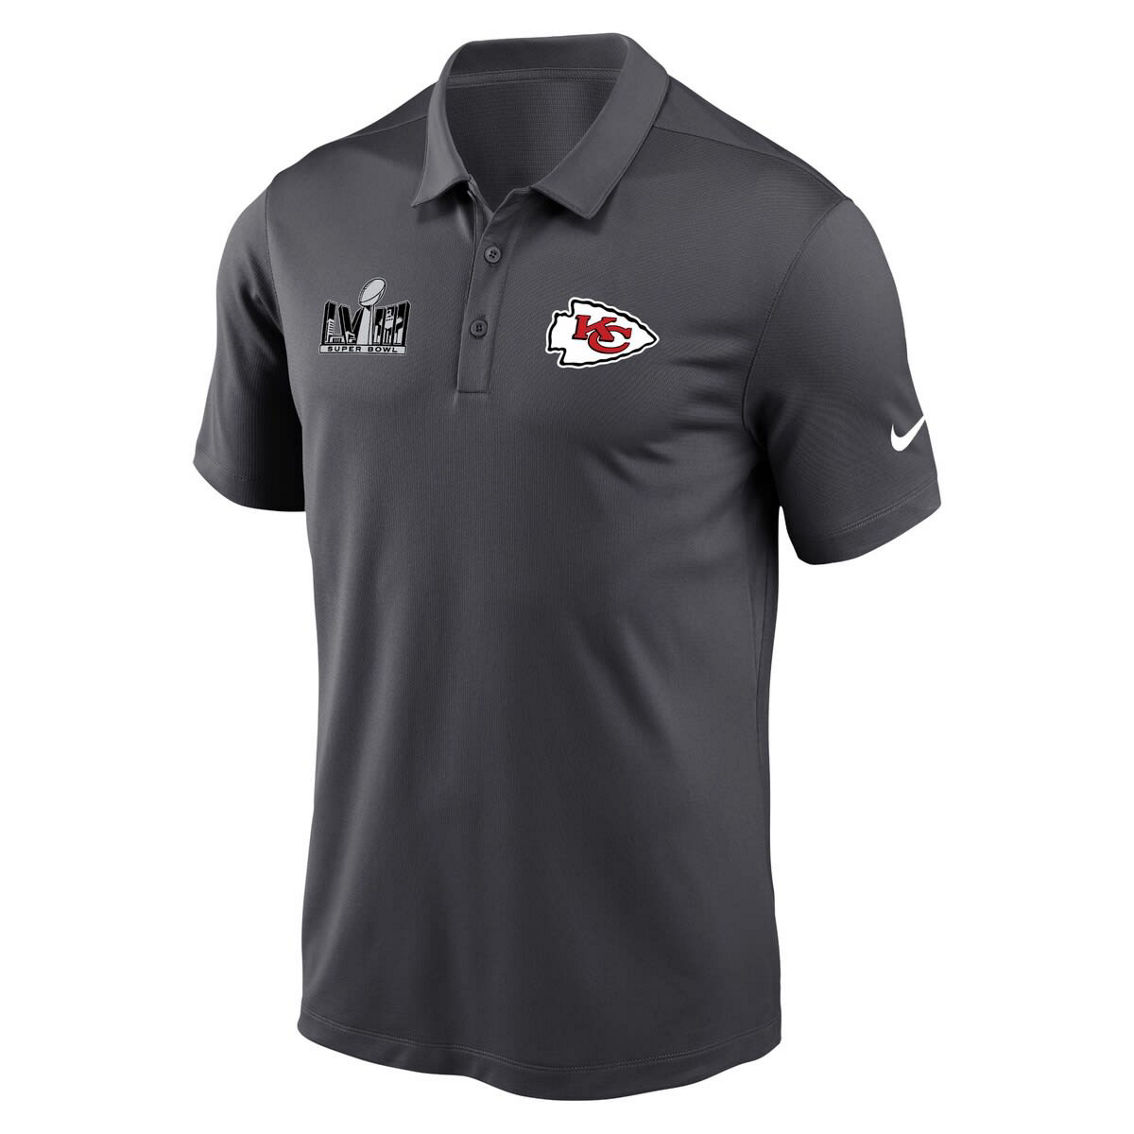 Nike Men's Anthracite Kansas City Chiefs Super Bowl LVIII Performance Patch Polo - Image 3 of 4